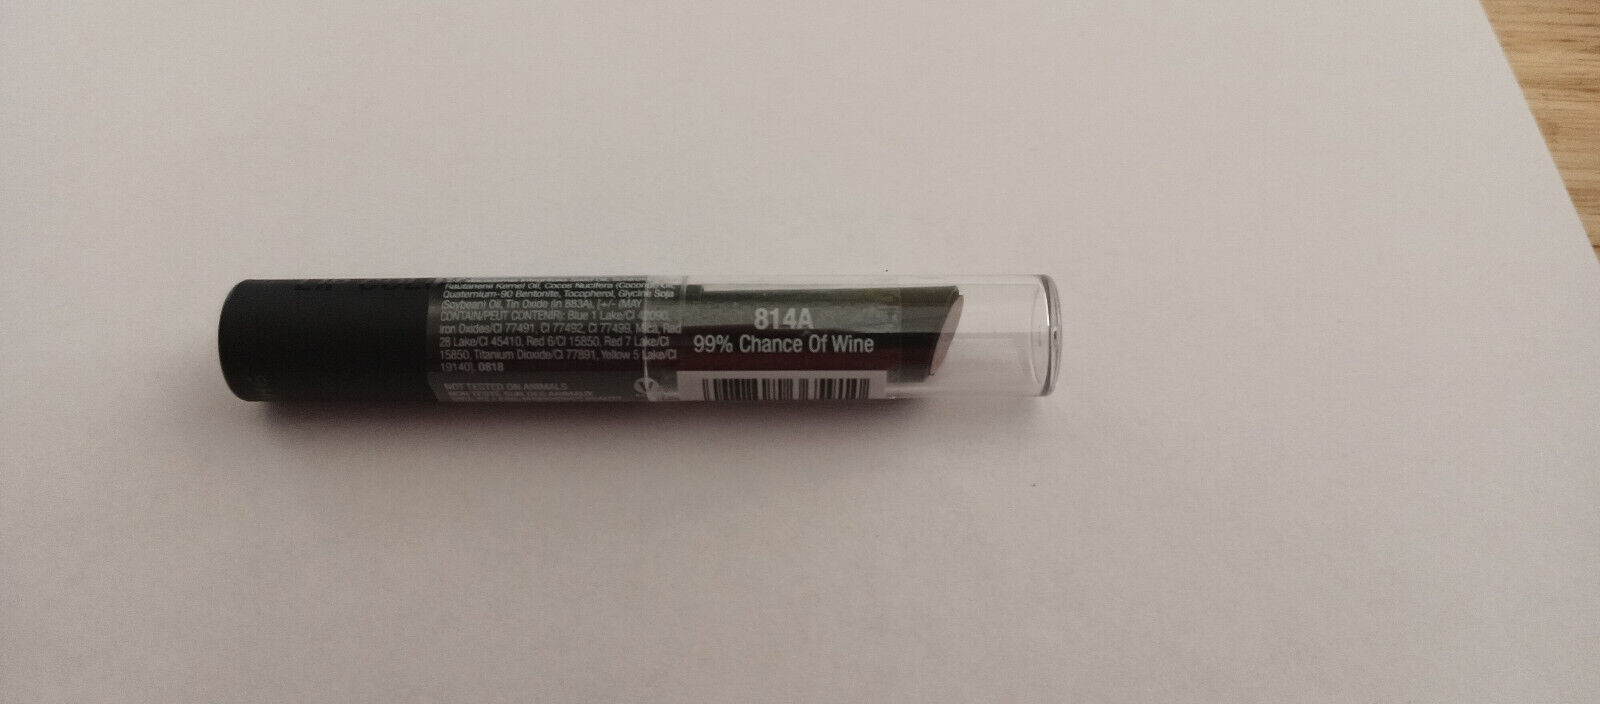 Wet n Wild Perfect Pout Lip Color 814A 99% Chance of Wine